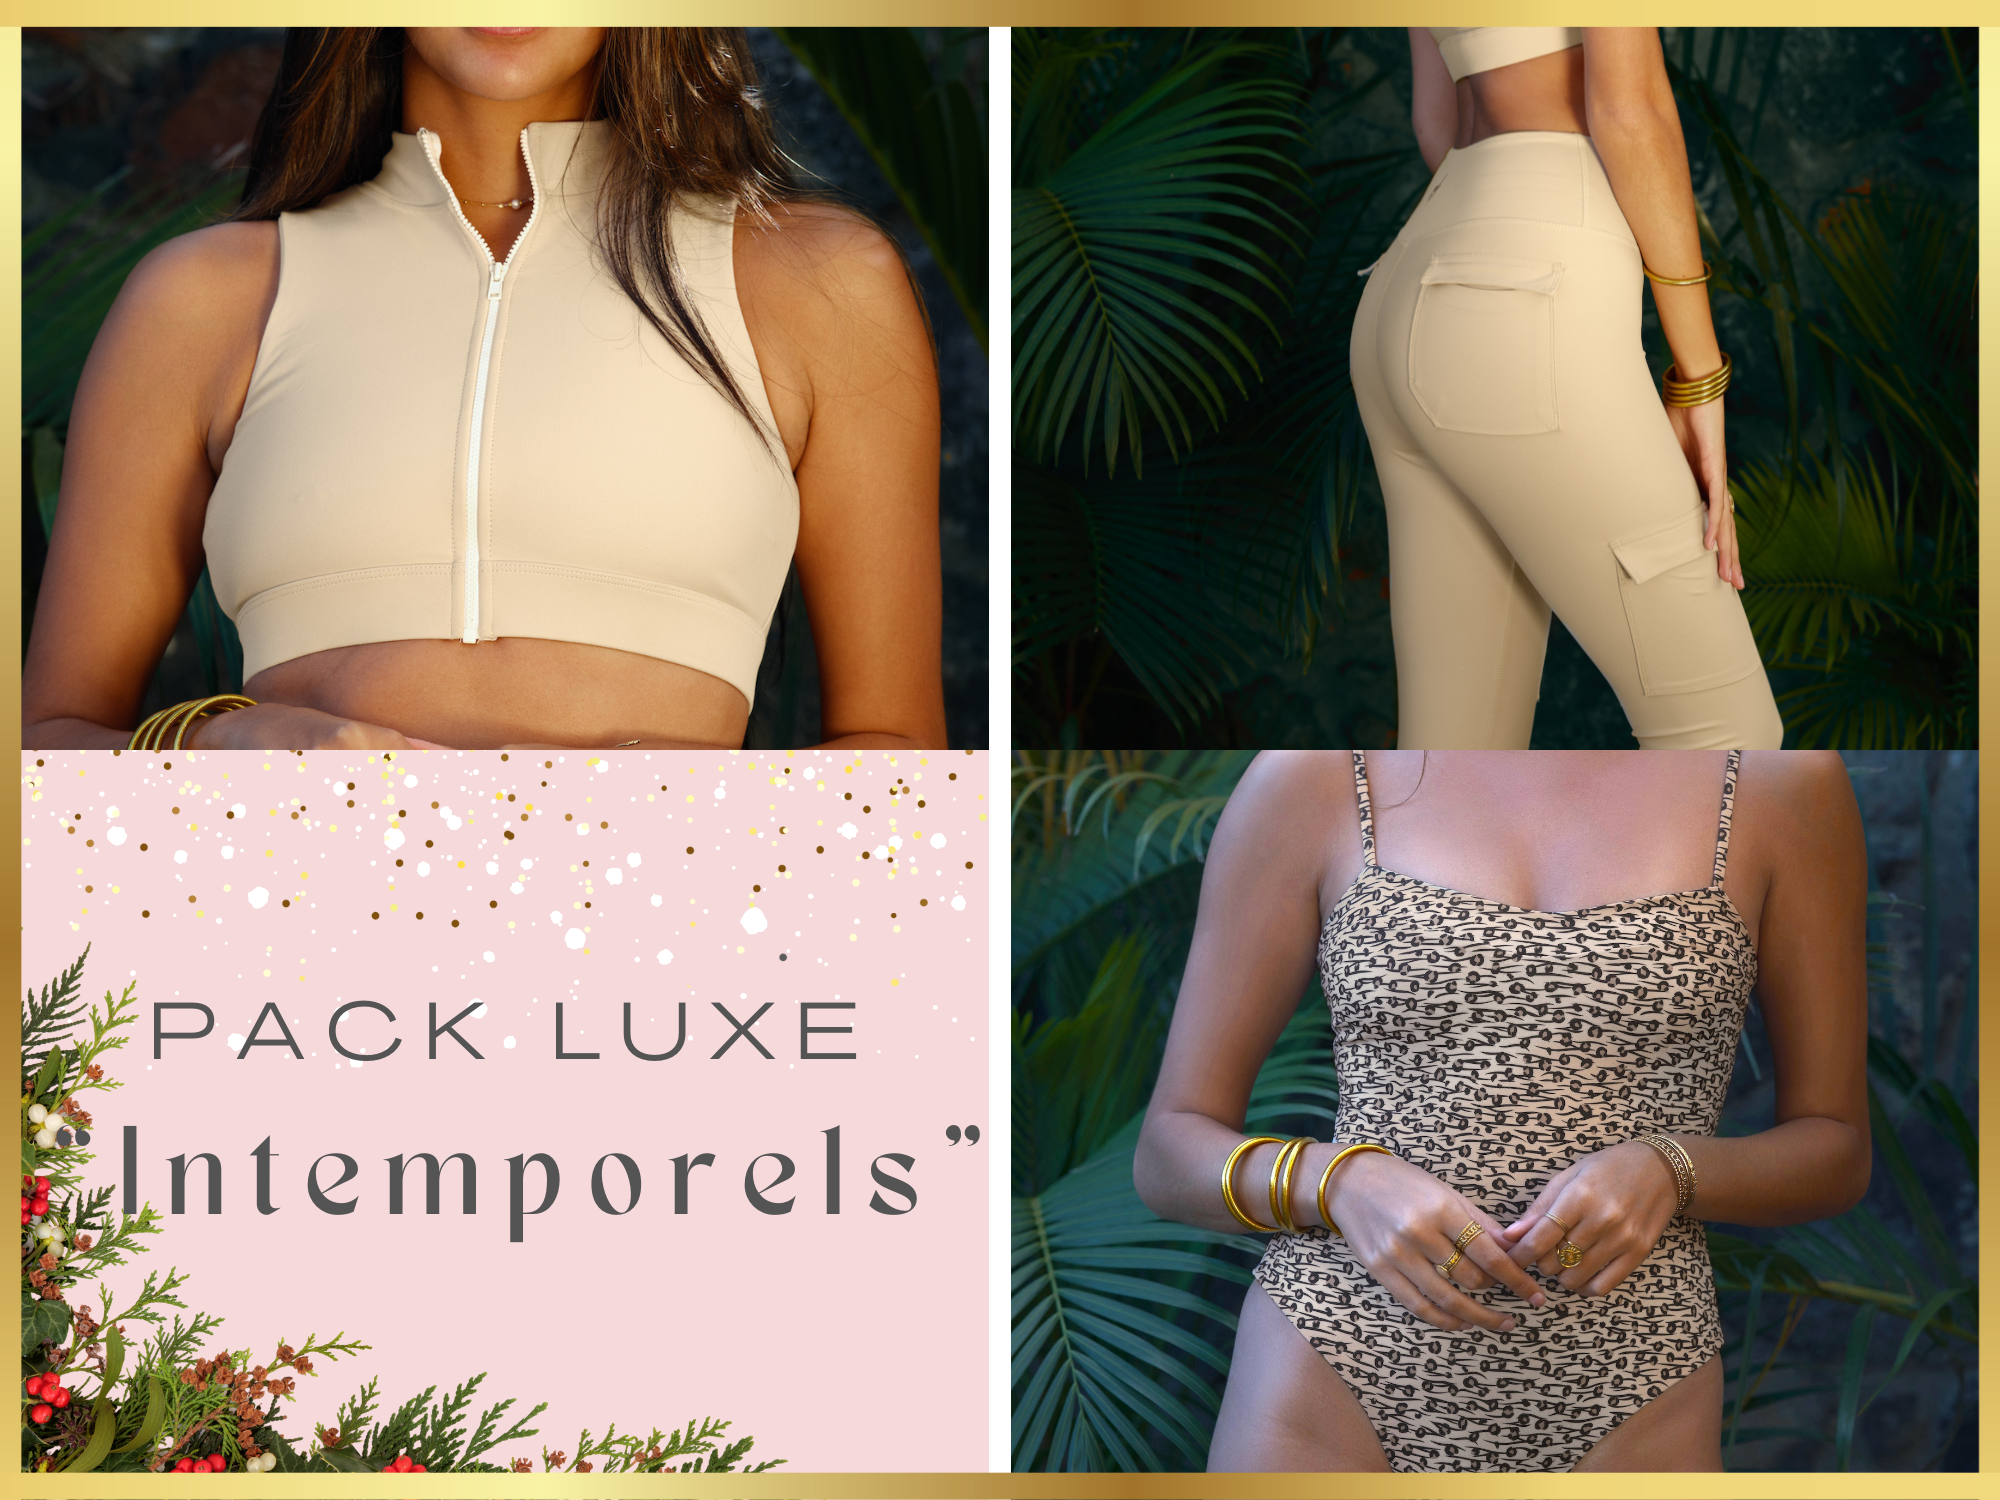 PACK LUXE "INTEMPORELS"